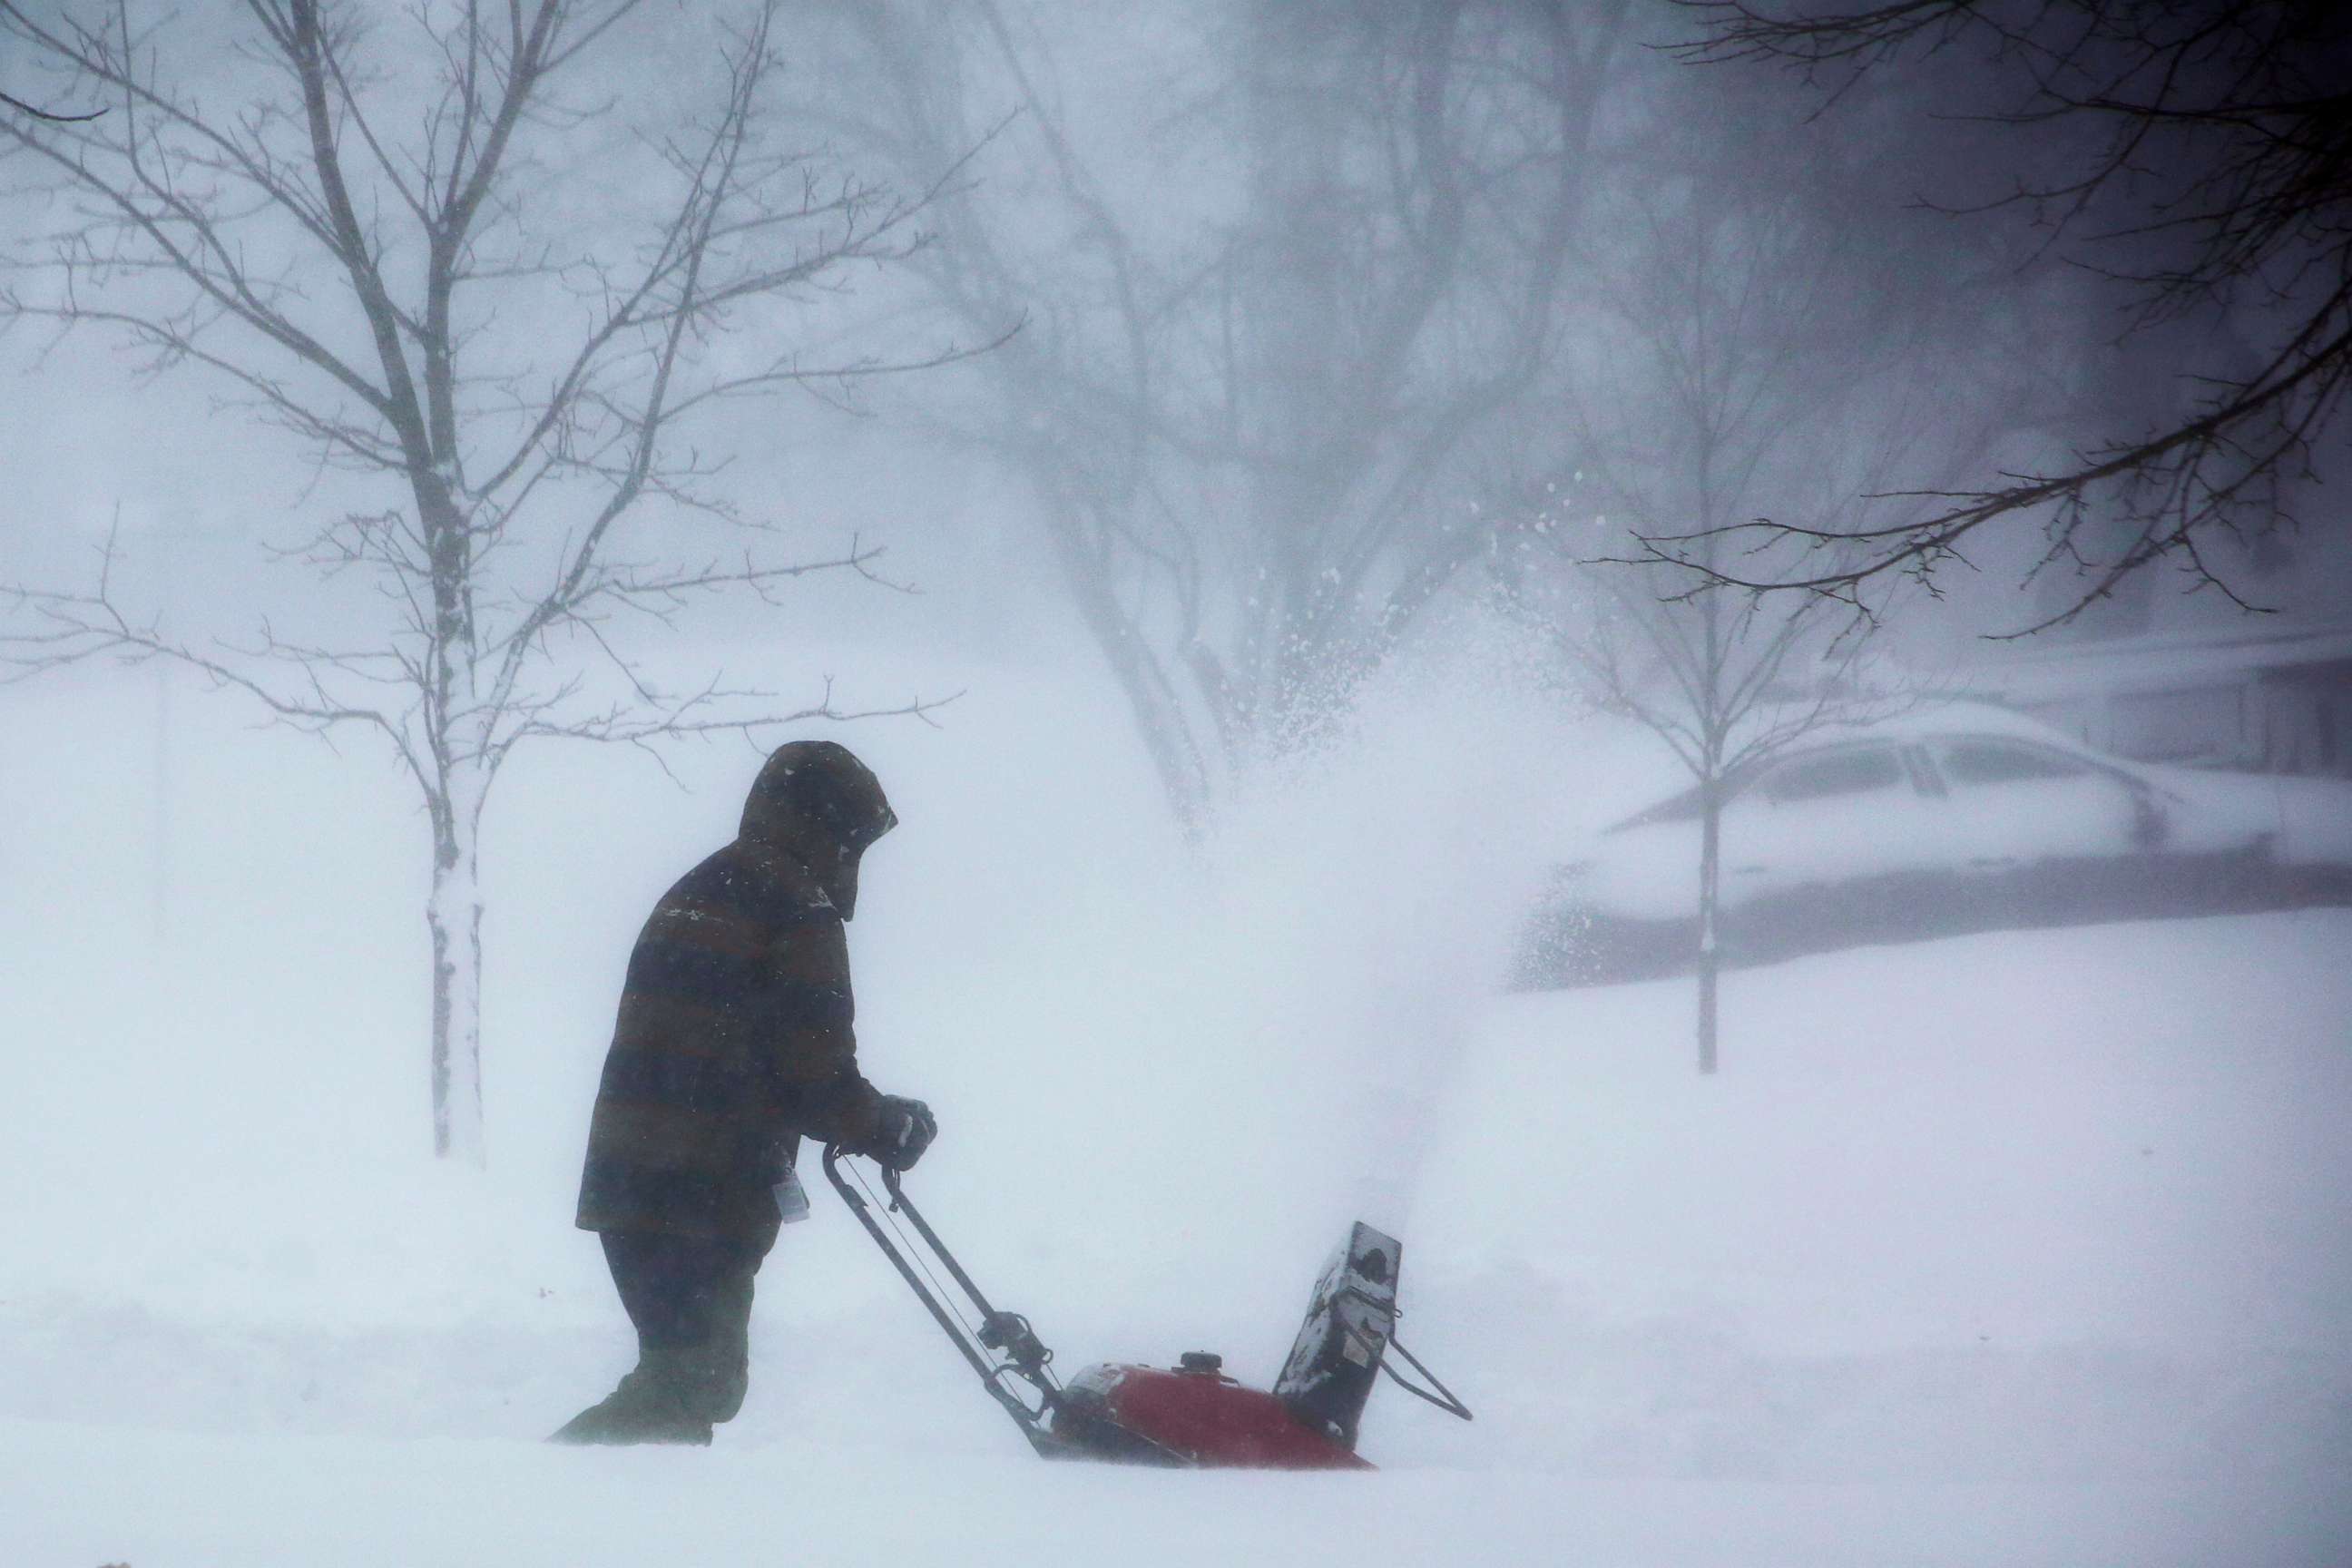 PHOTO: A person clears snow as a winter storm rolls through Western New York, Dec. 24, 2022, in Amherst N.Y.